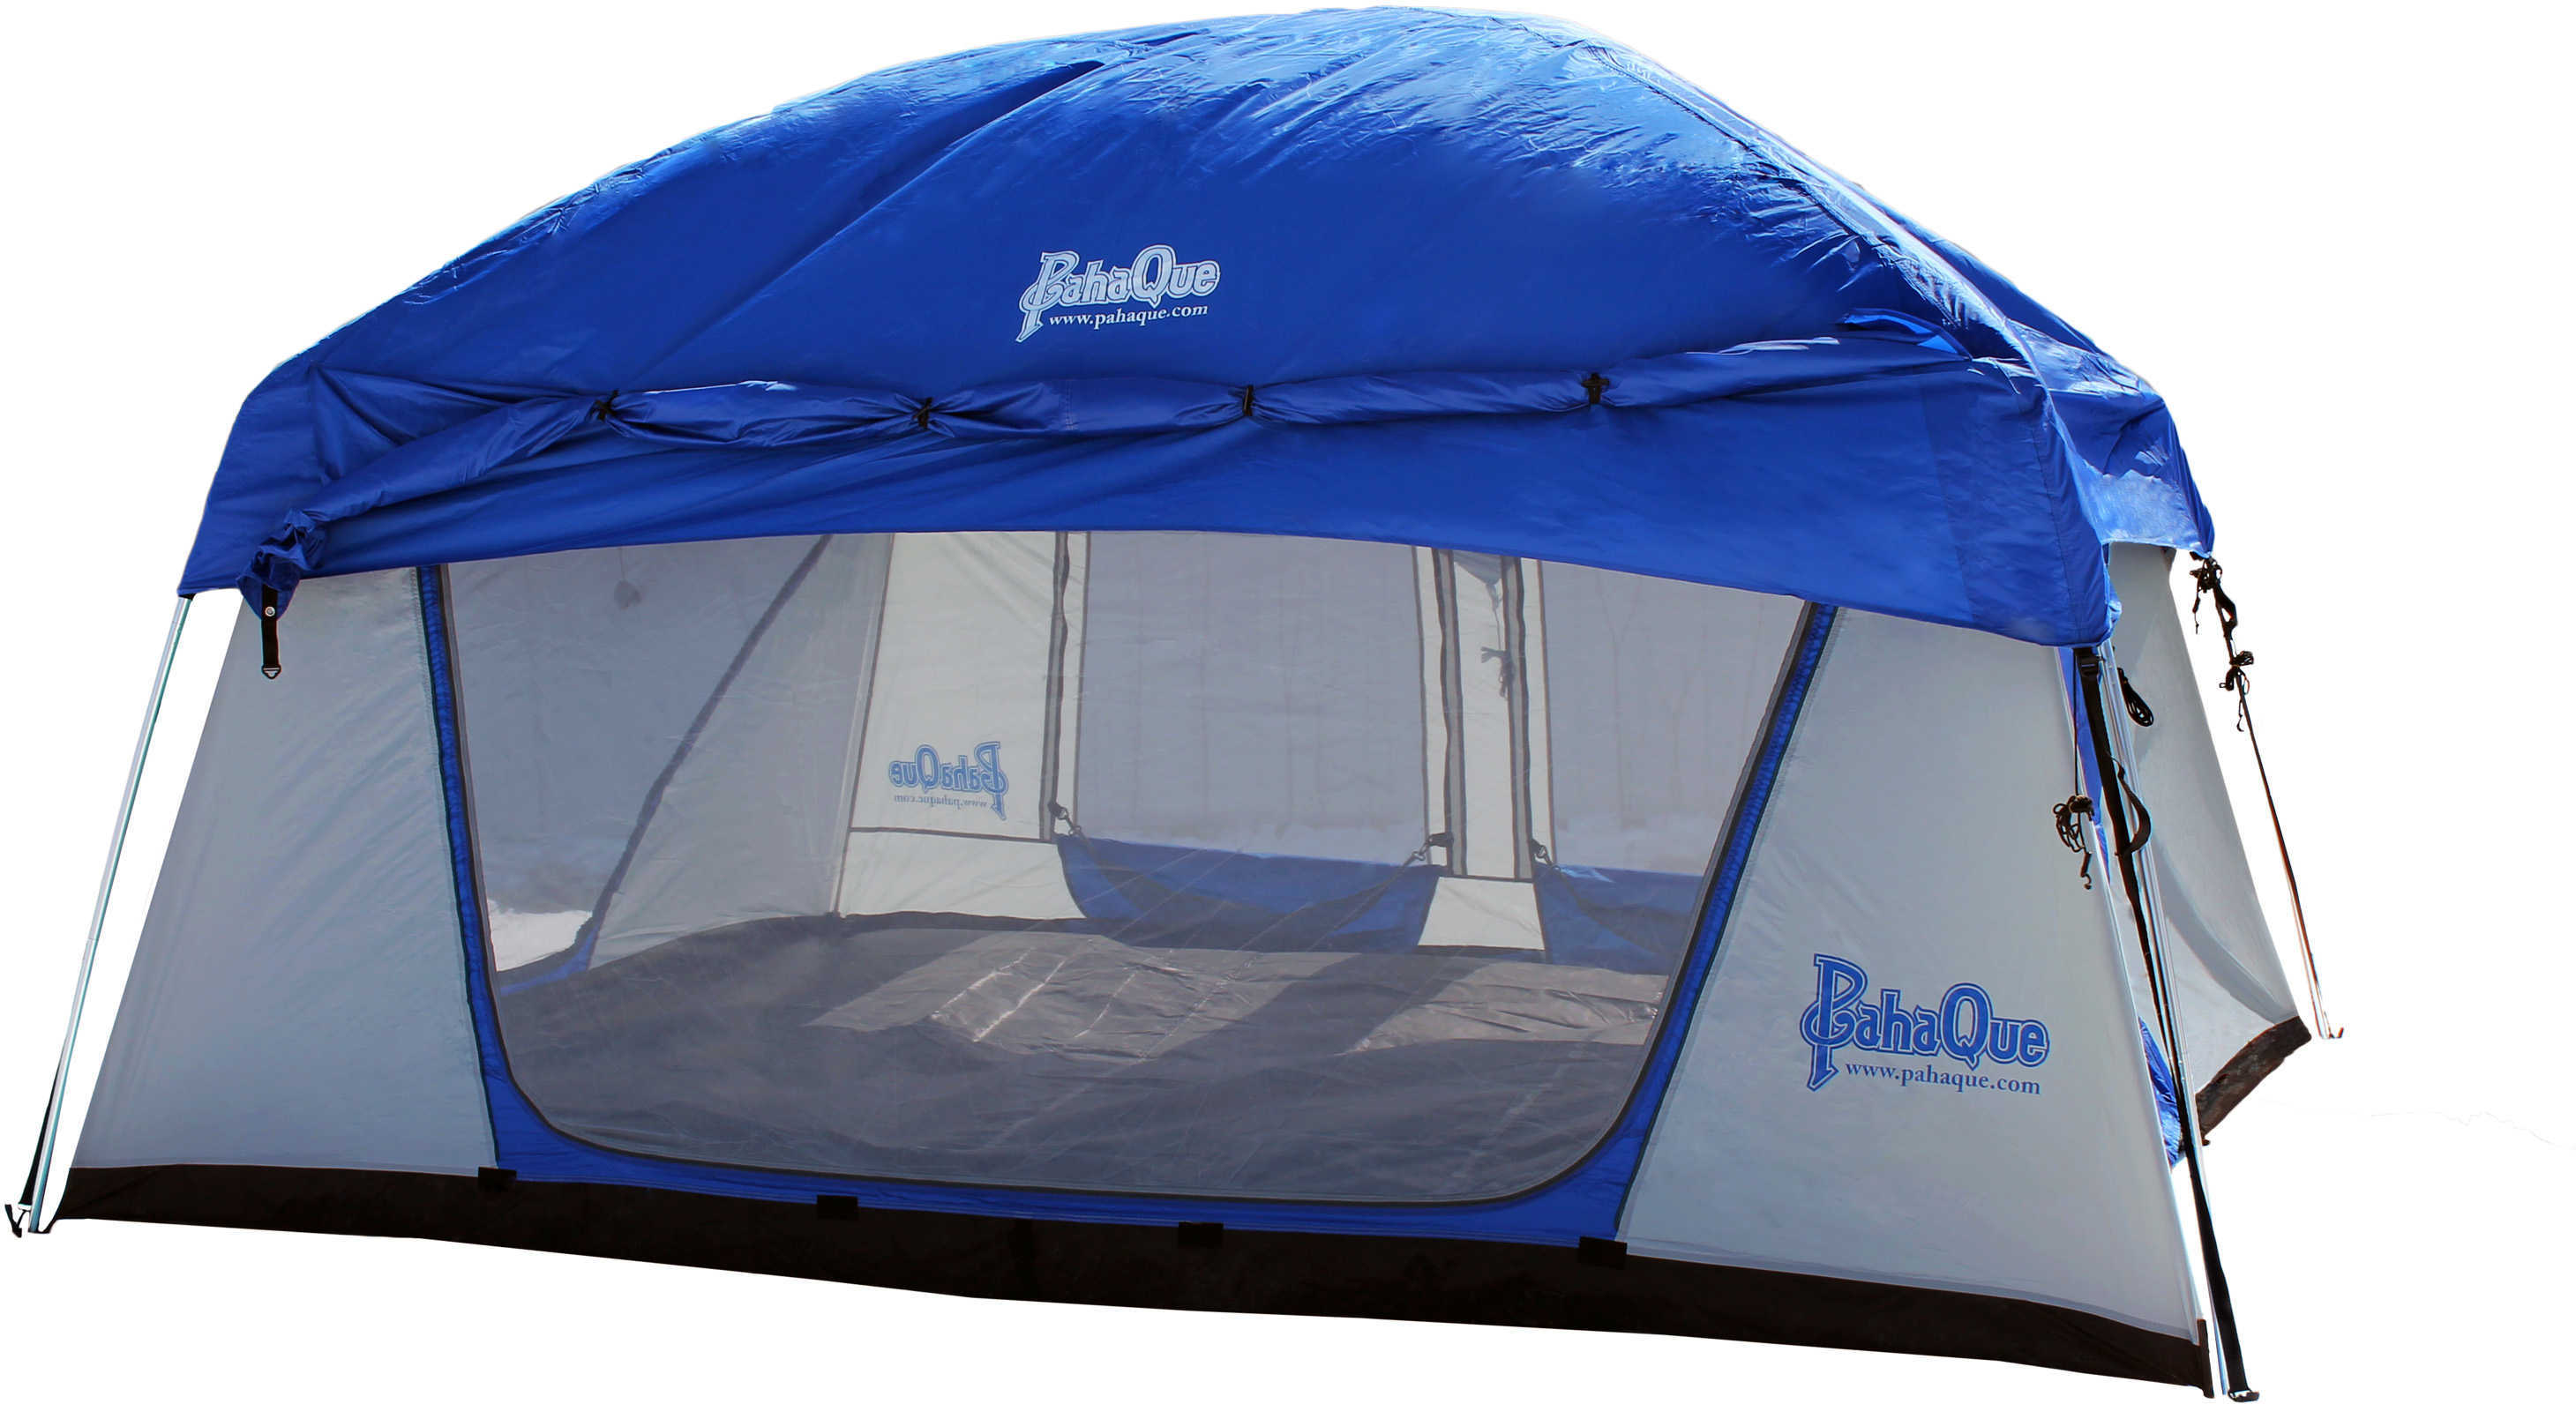 PahaQue Promontory XD 8 Person Tent